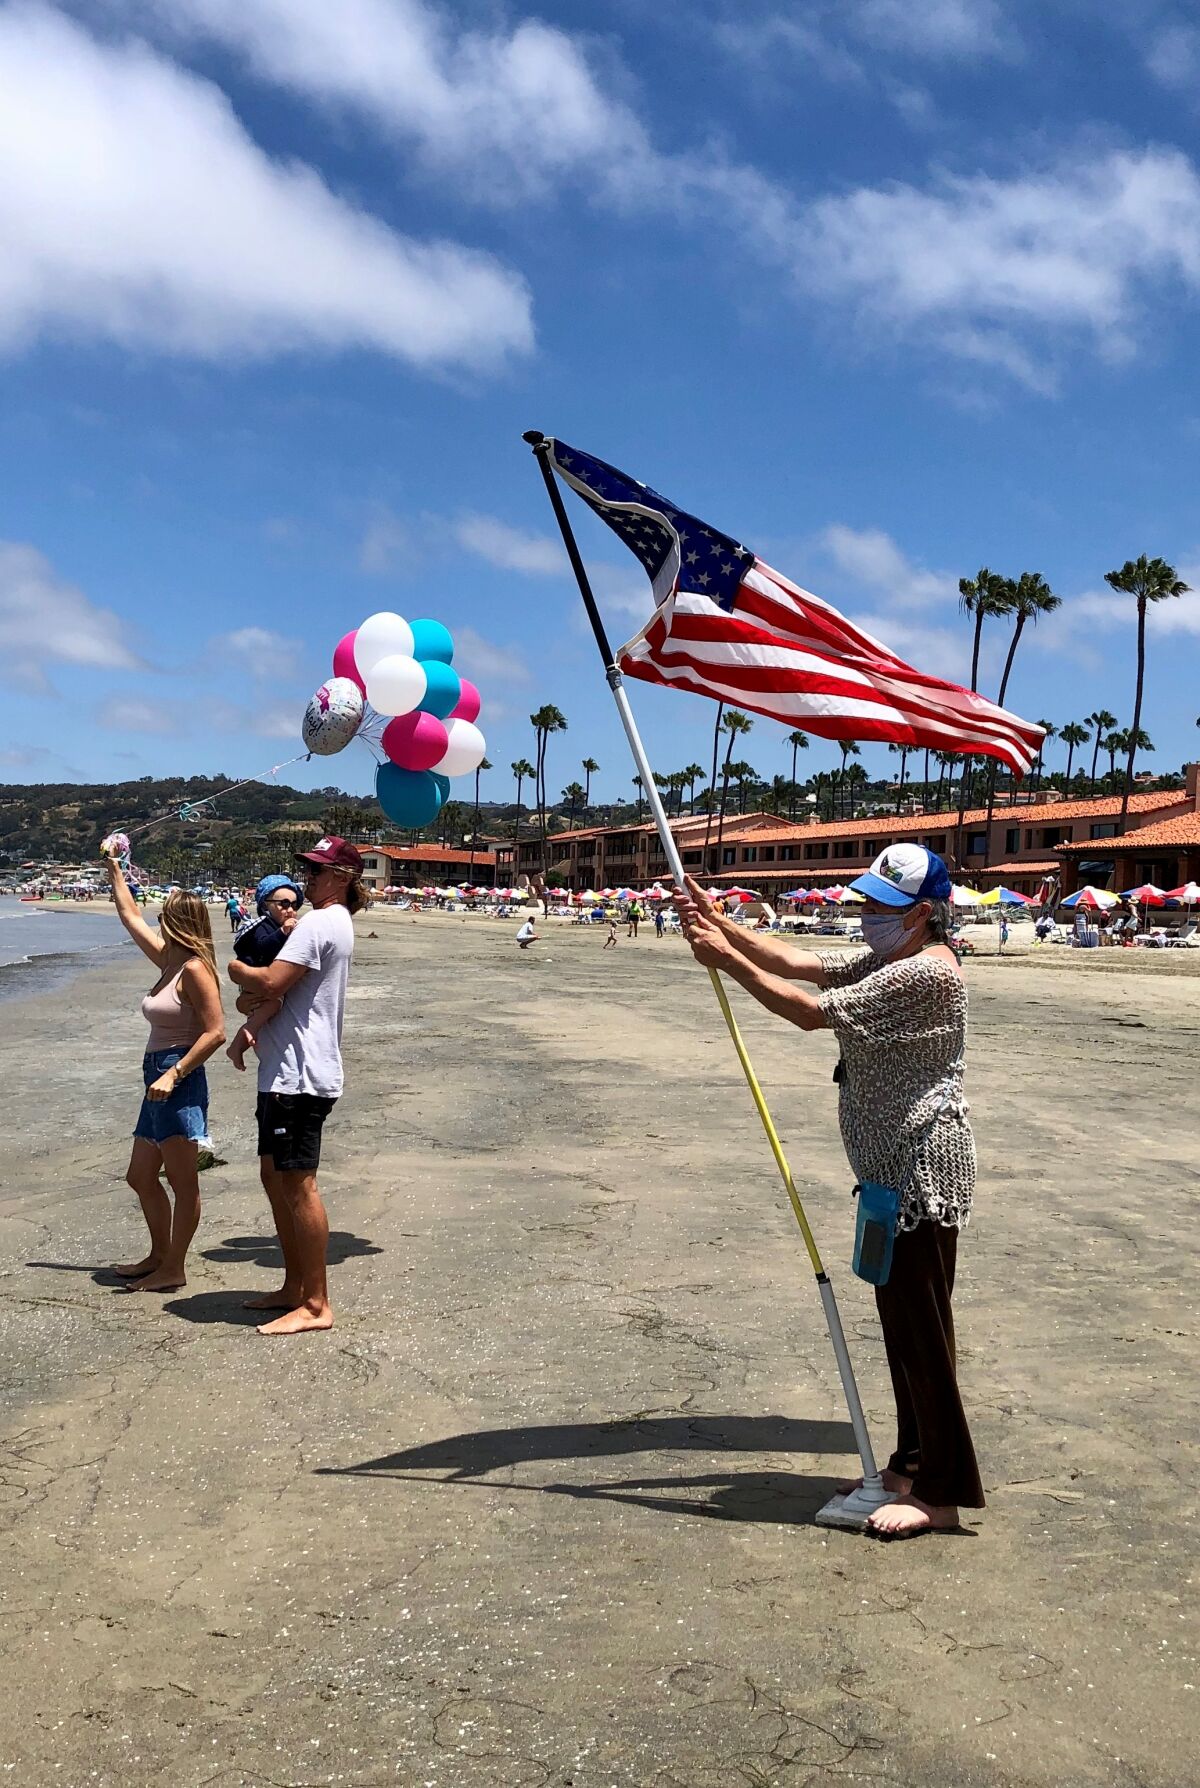 Friends and family members of La Jollan Laura McDonald await her at La Jolla Shores after she completed a 4-mile swim.